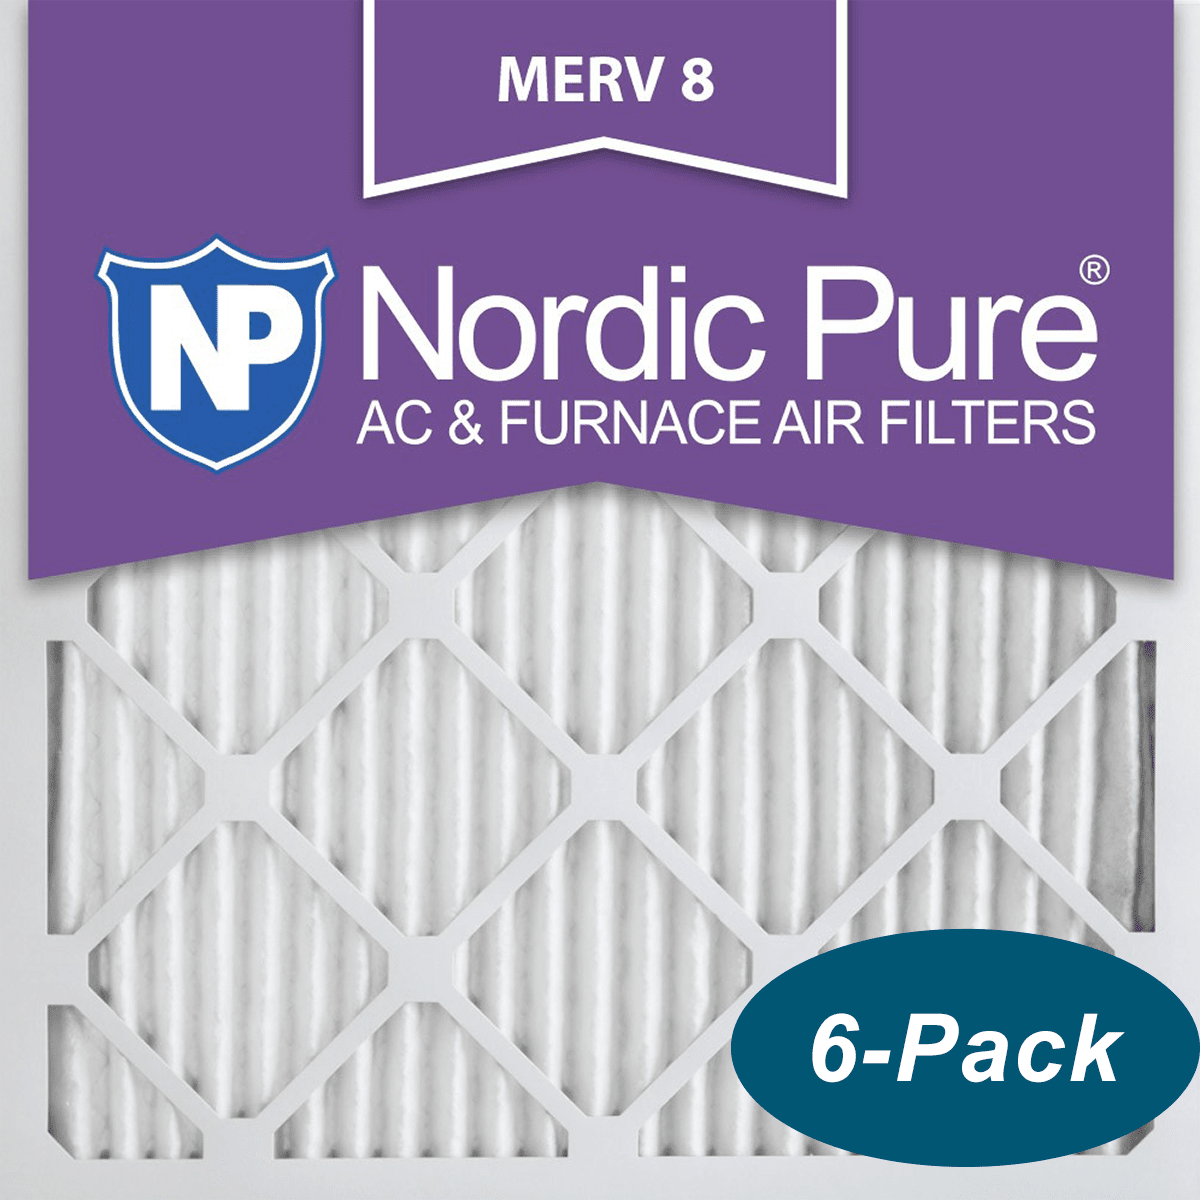 Nordic Pure MERV 8 Pleated Furnace Filter 20x20x1 6-Pack (20x20x1M8-6)